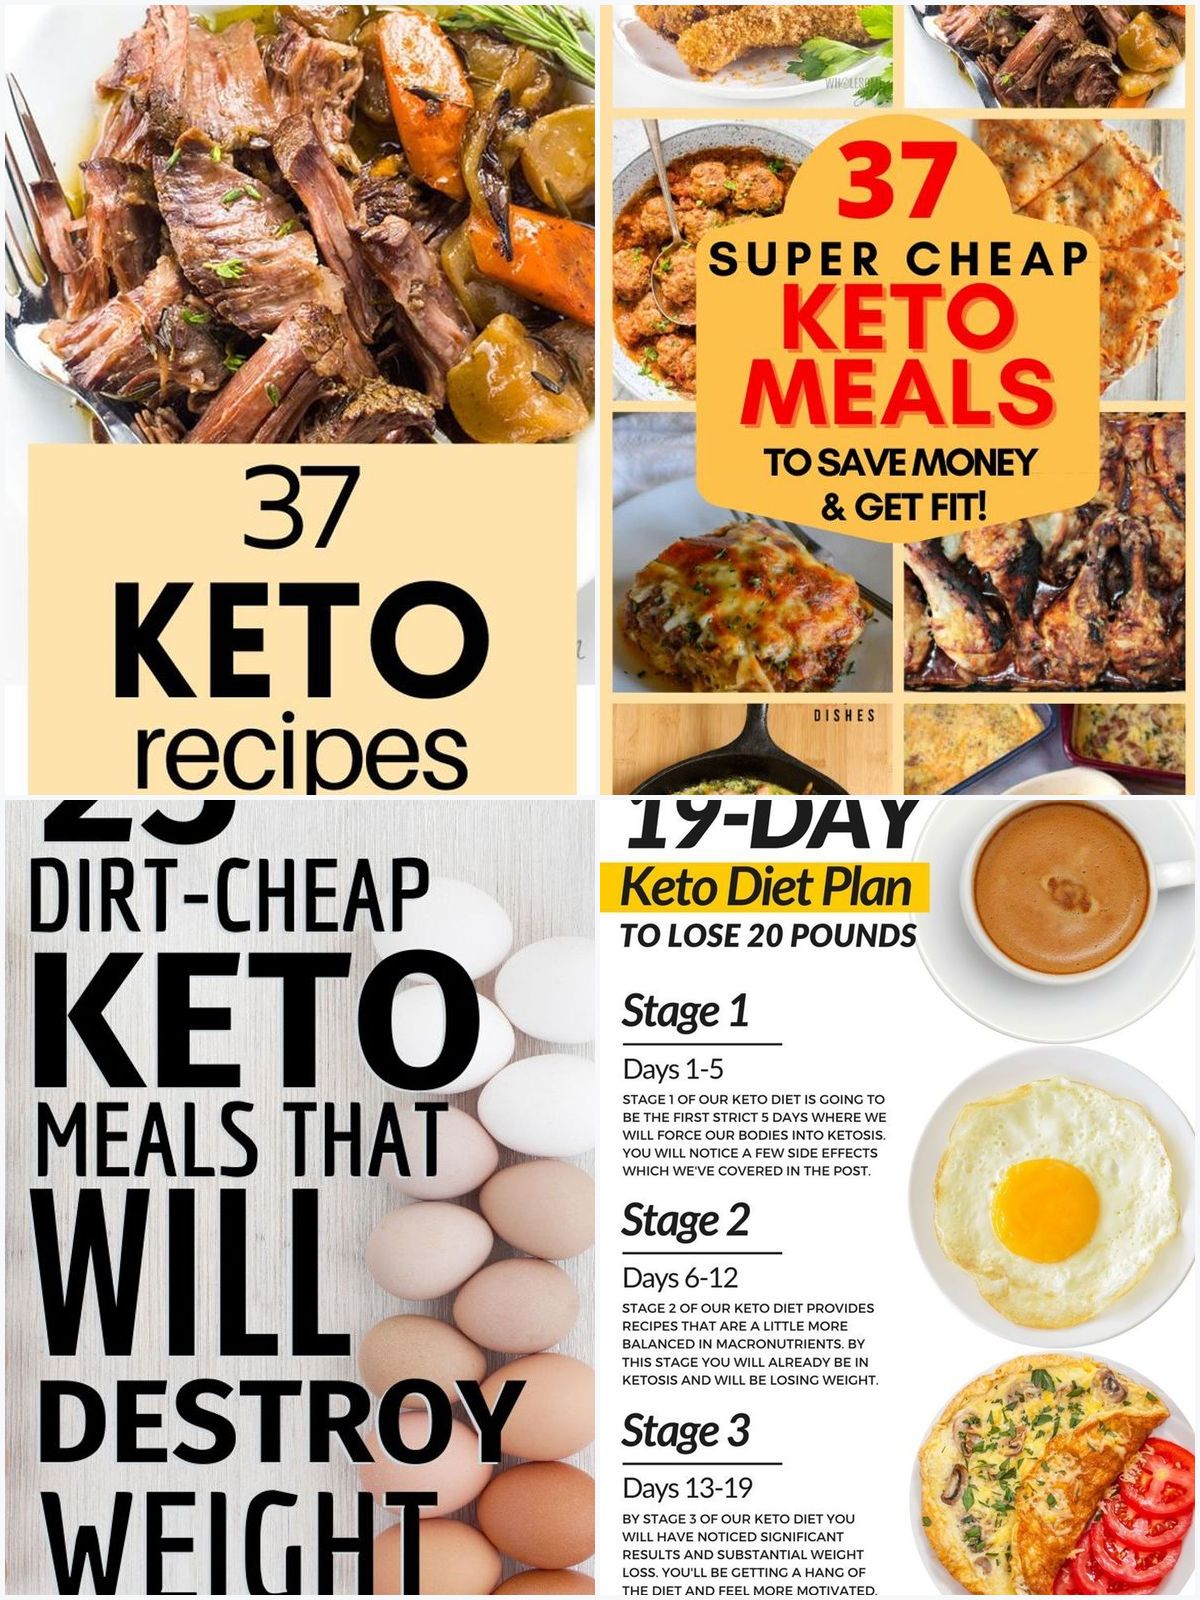 My favorite ideas for cheap keto meals